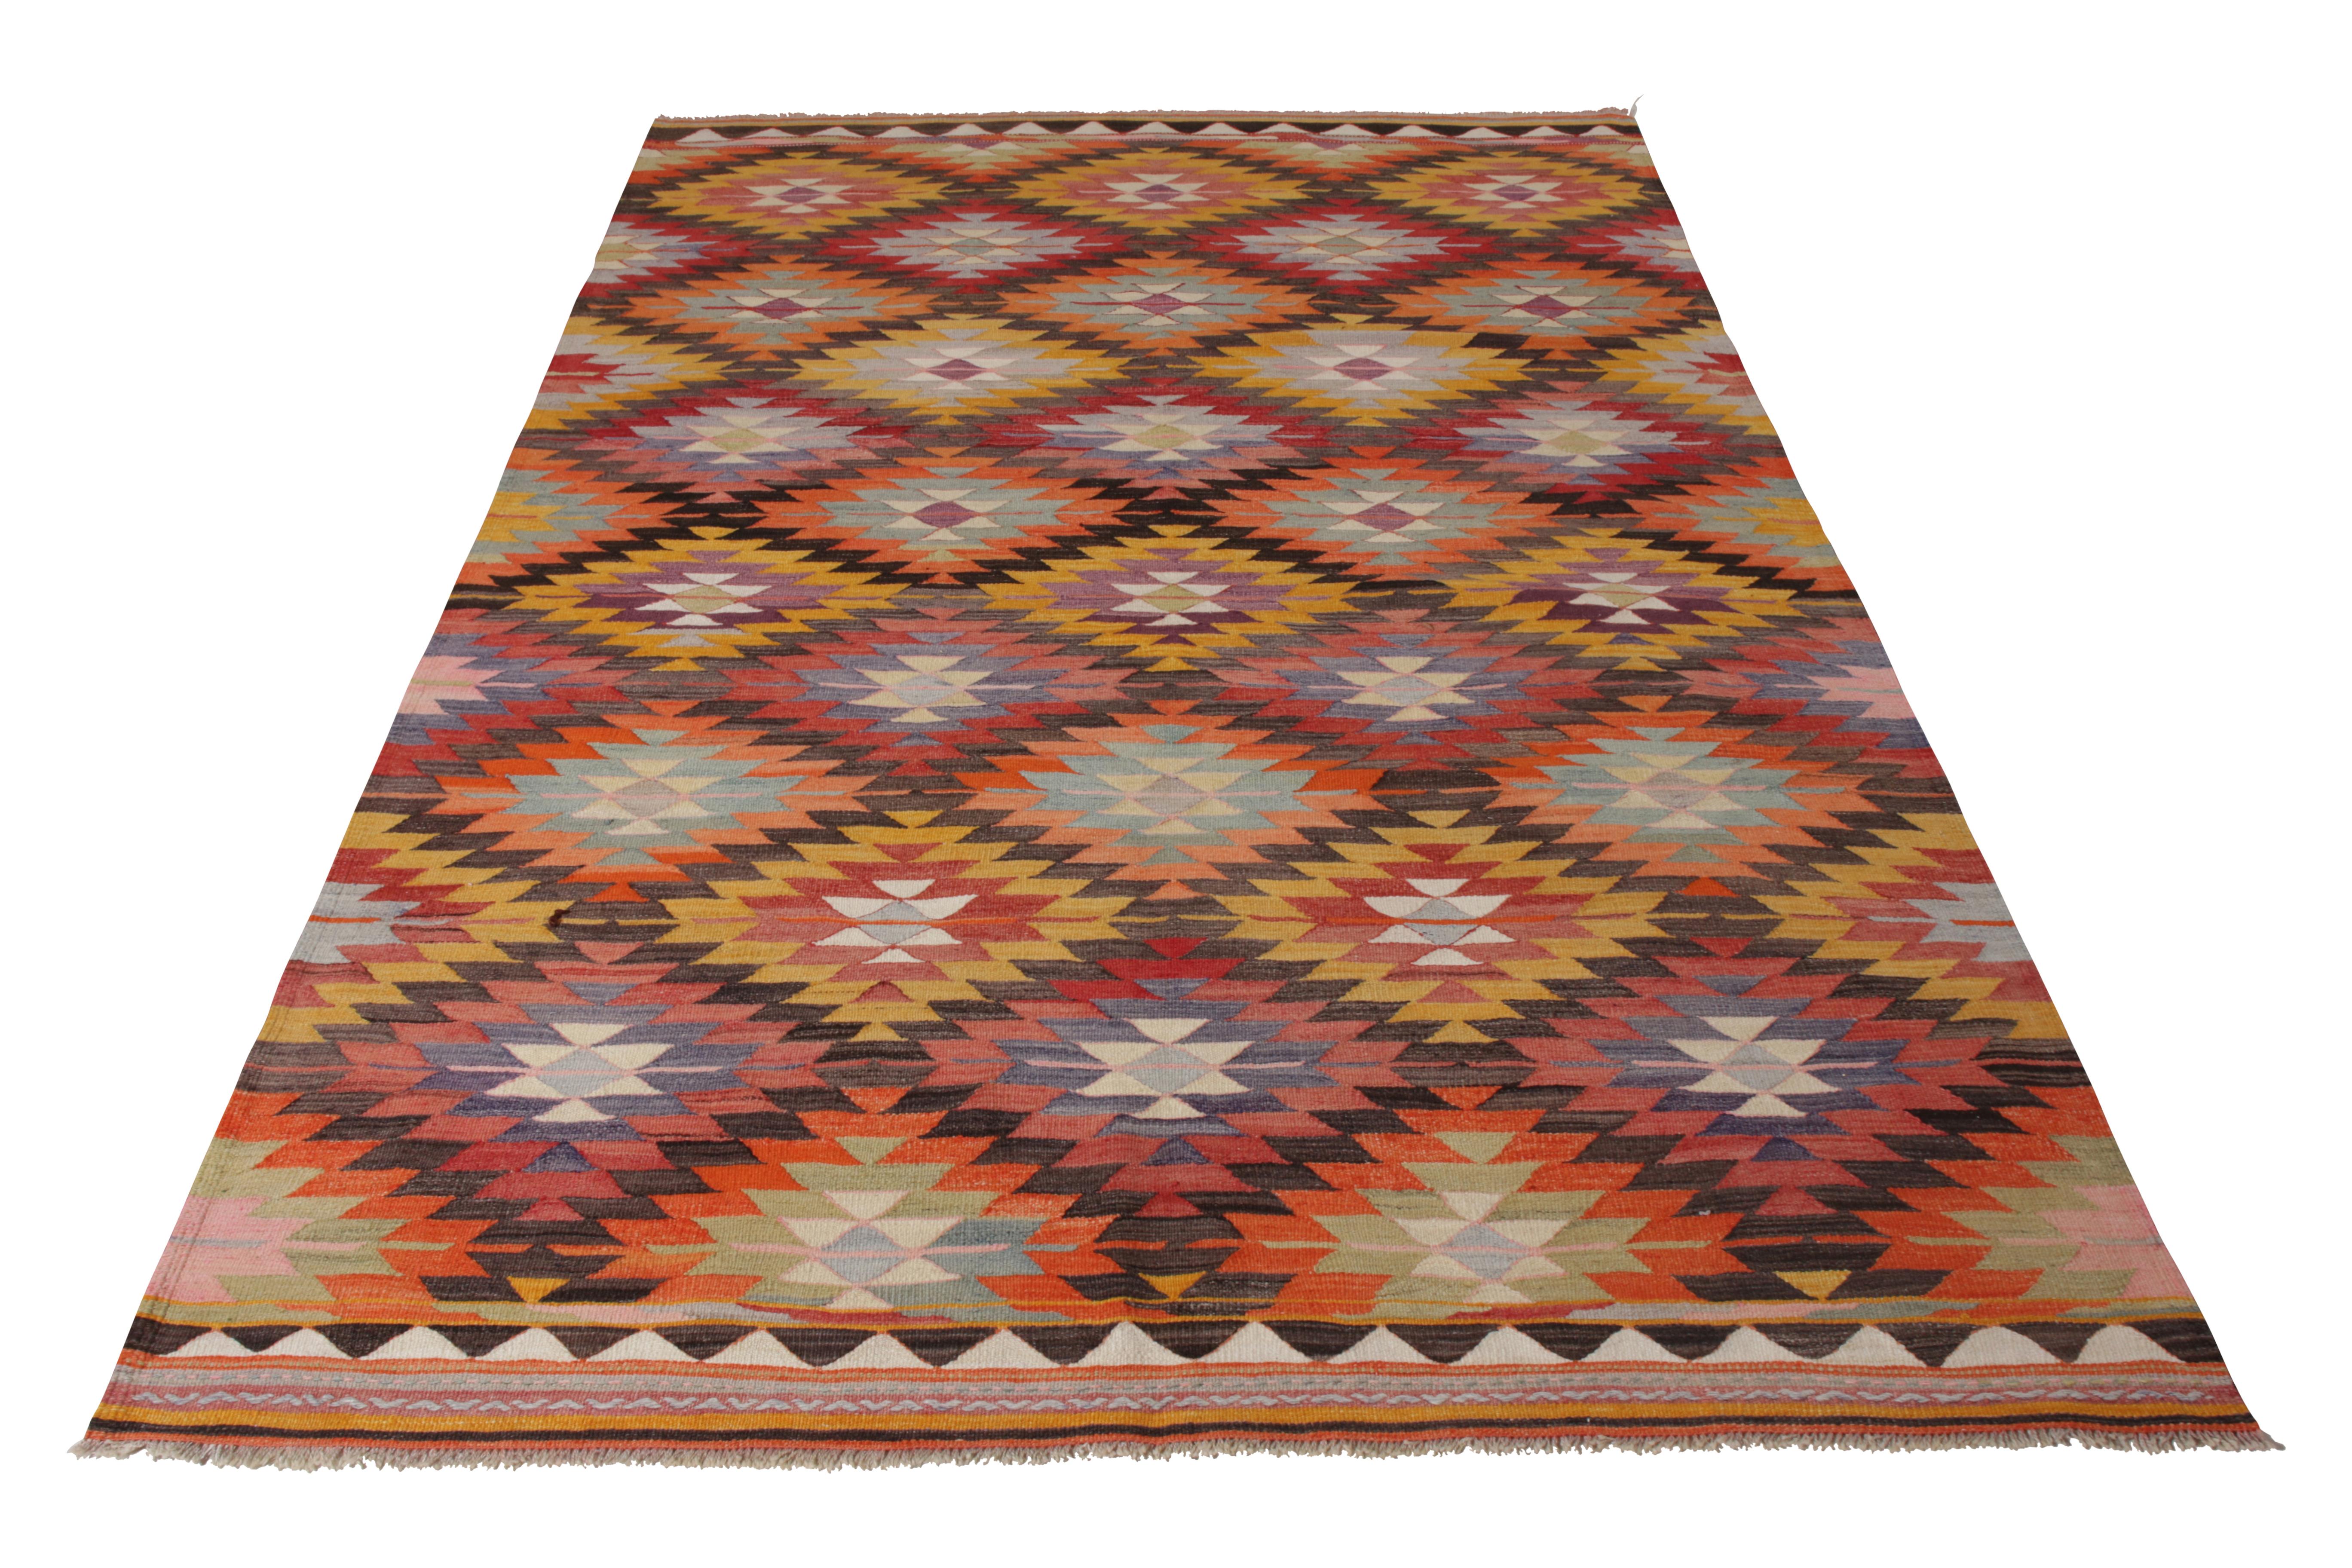 A 6 x 9 vintage Kilim rug in handwoven wool, originating from Turkey, circa 1950-1960. Enjoying warm orange and gold in the wide-spanning tribal colorway pallet throughout the all over geometric pattern. Inviting in its repetition, arresting in its